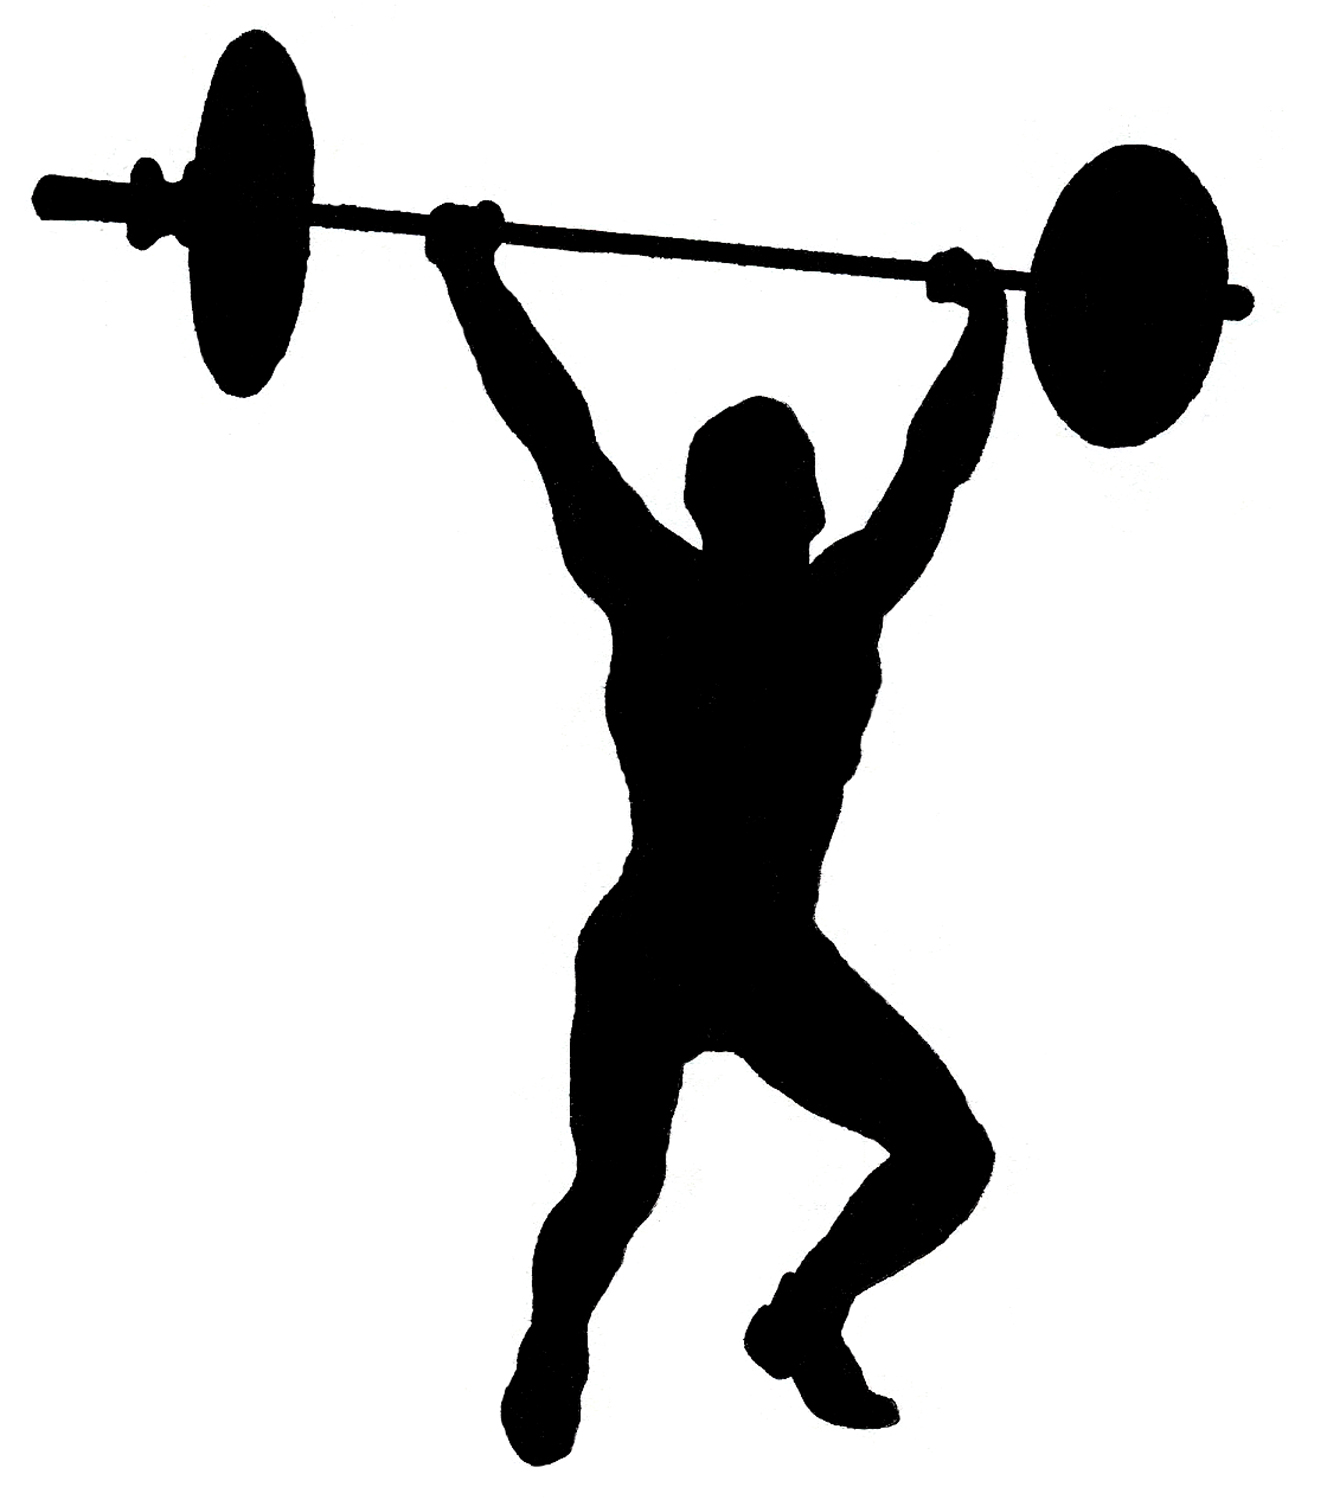 Free Exercise Silhouette Cliparts, Download Free Clip Art